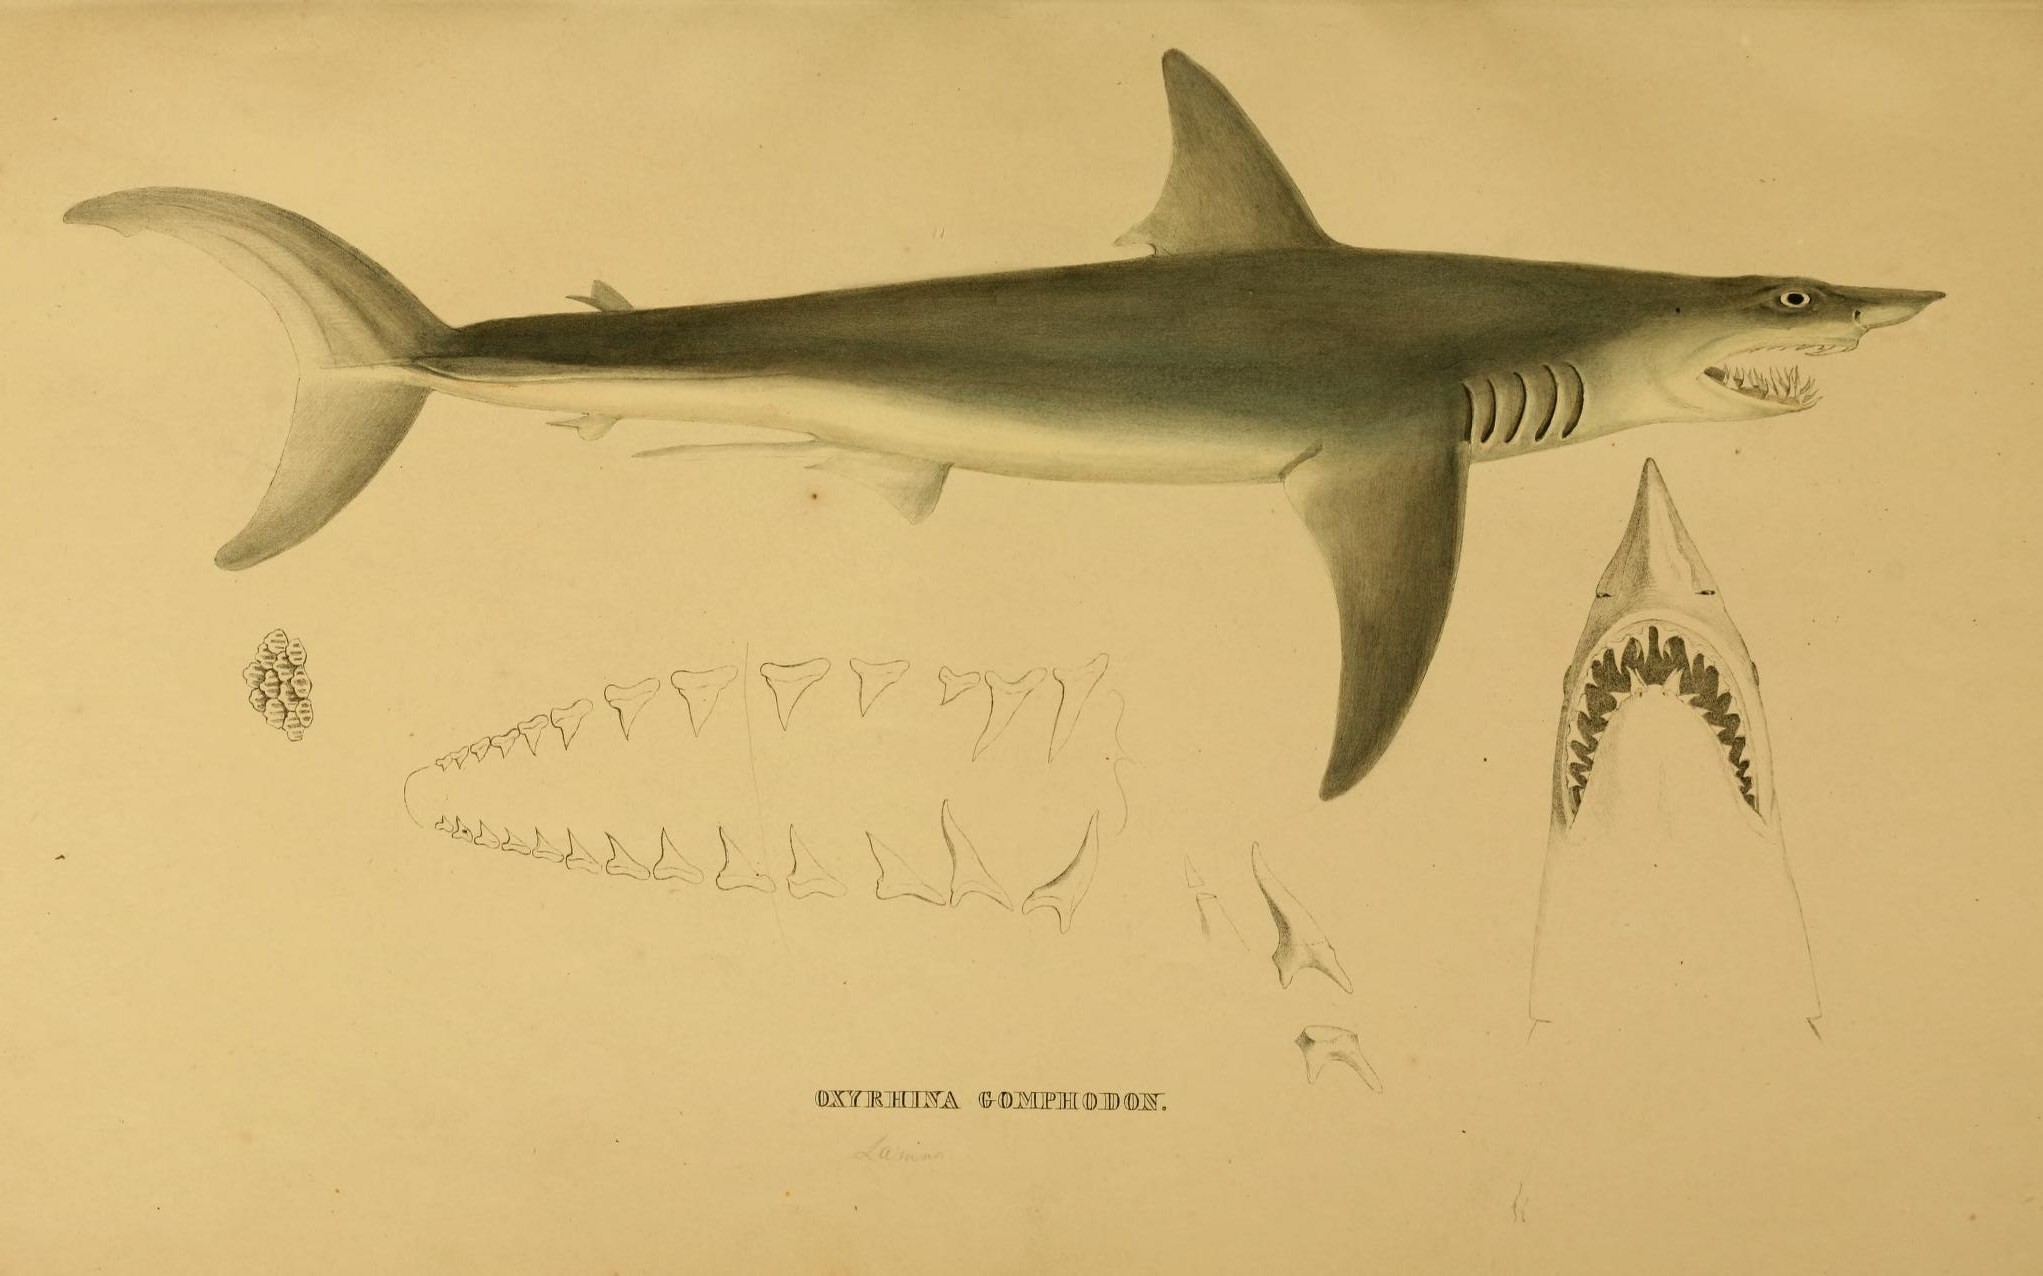 two drawings of sharks that are showing the various teeth